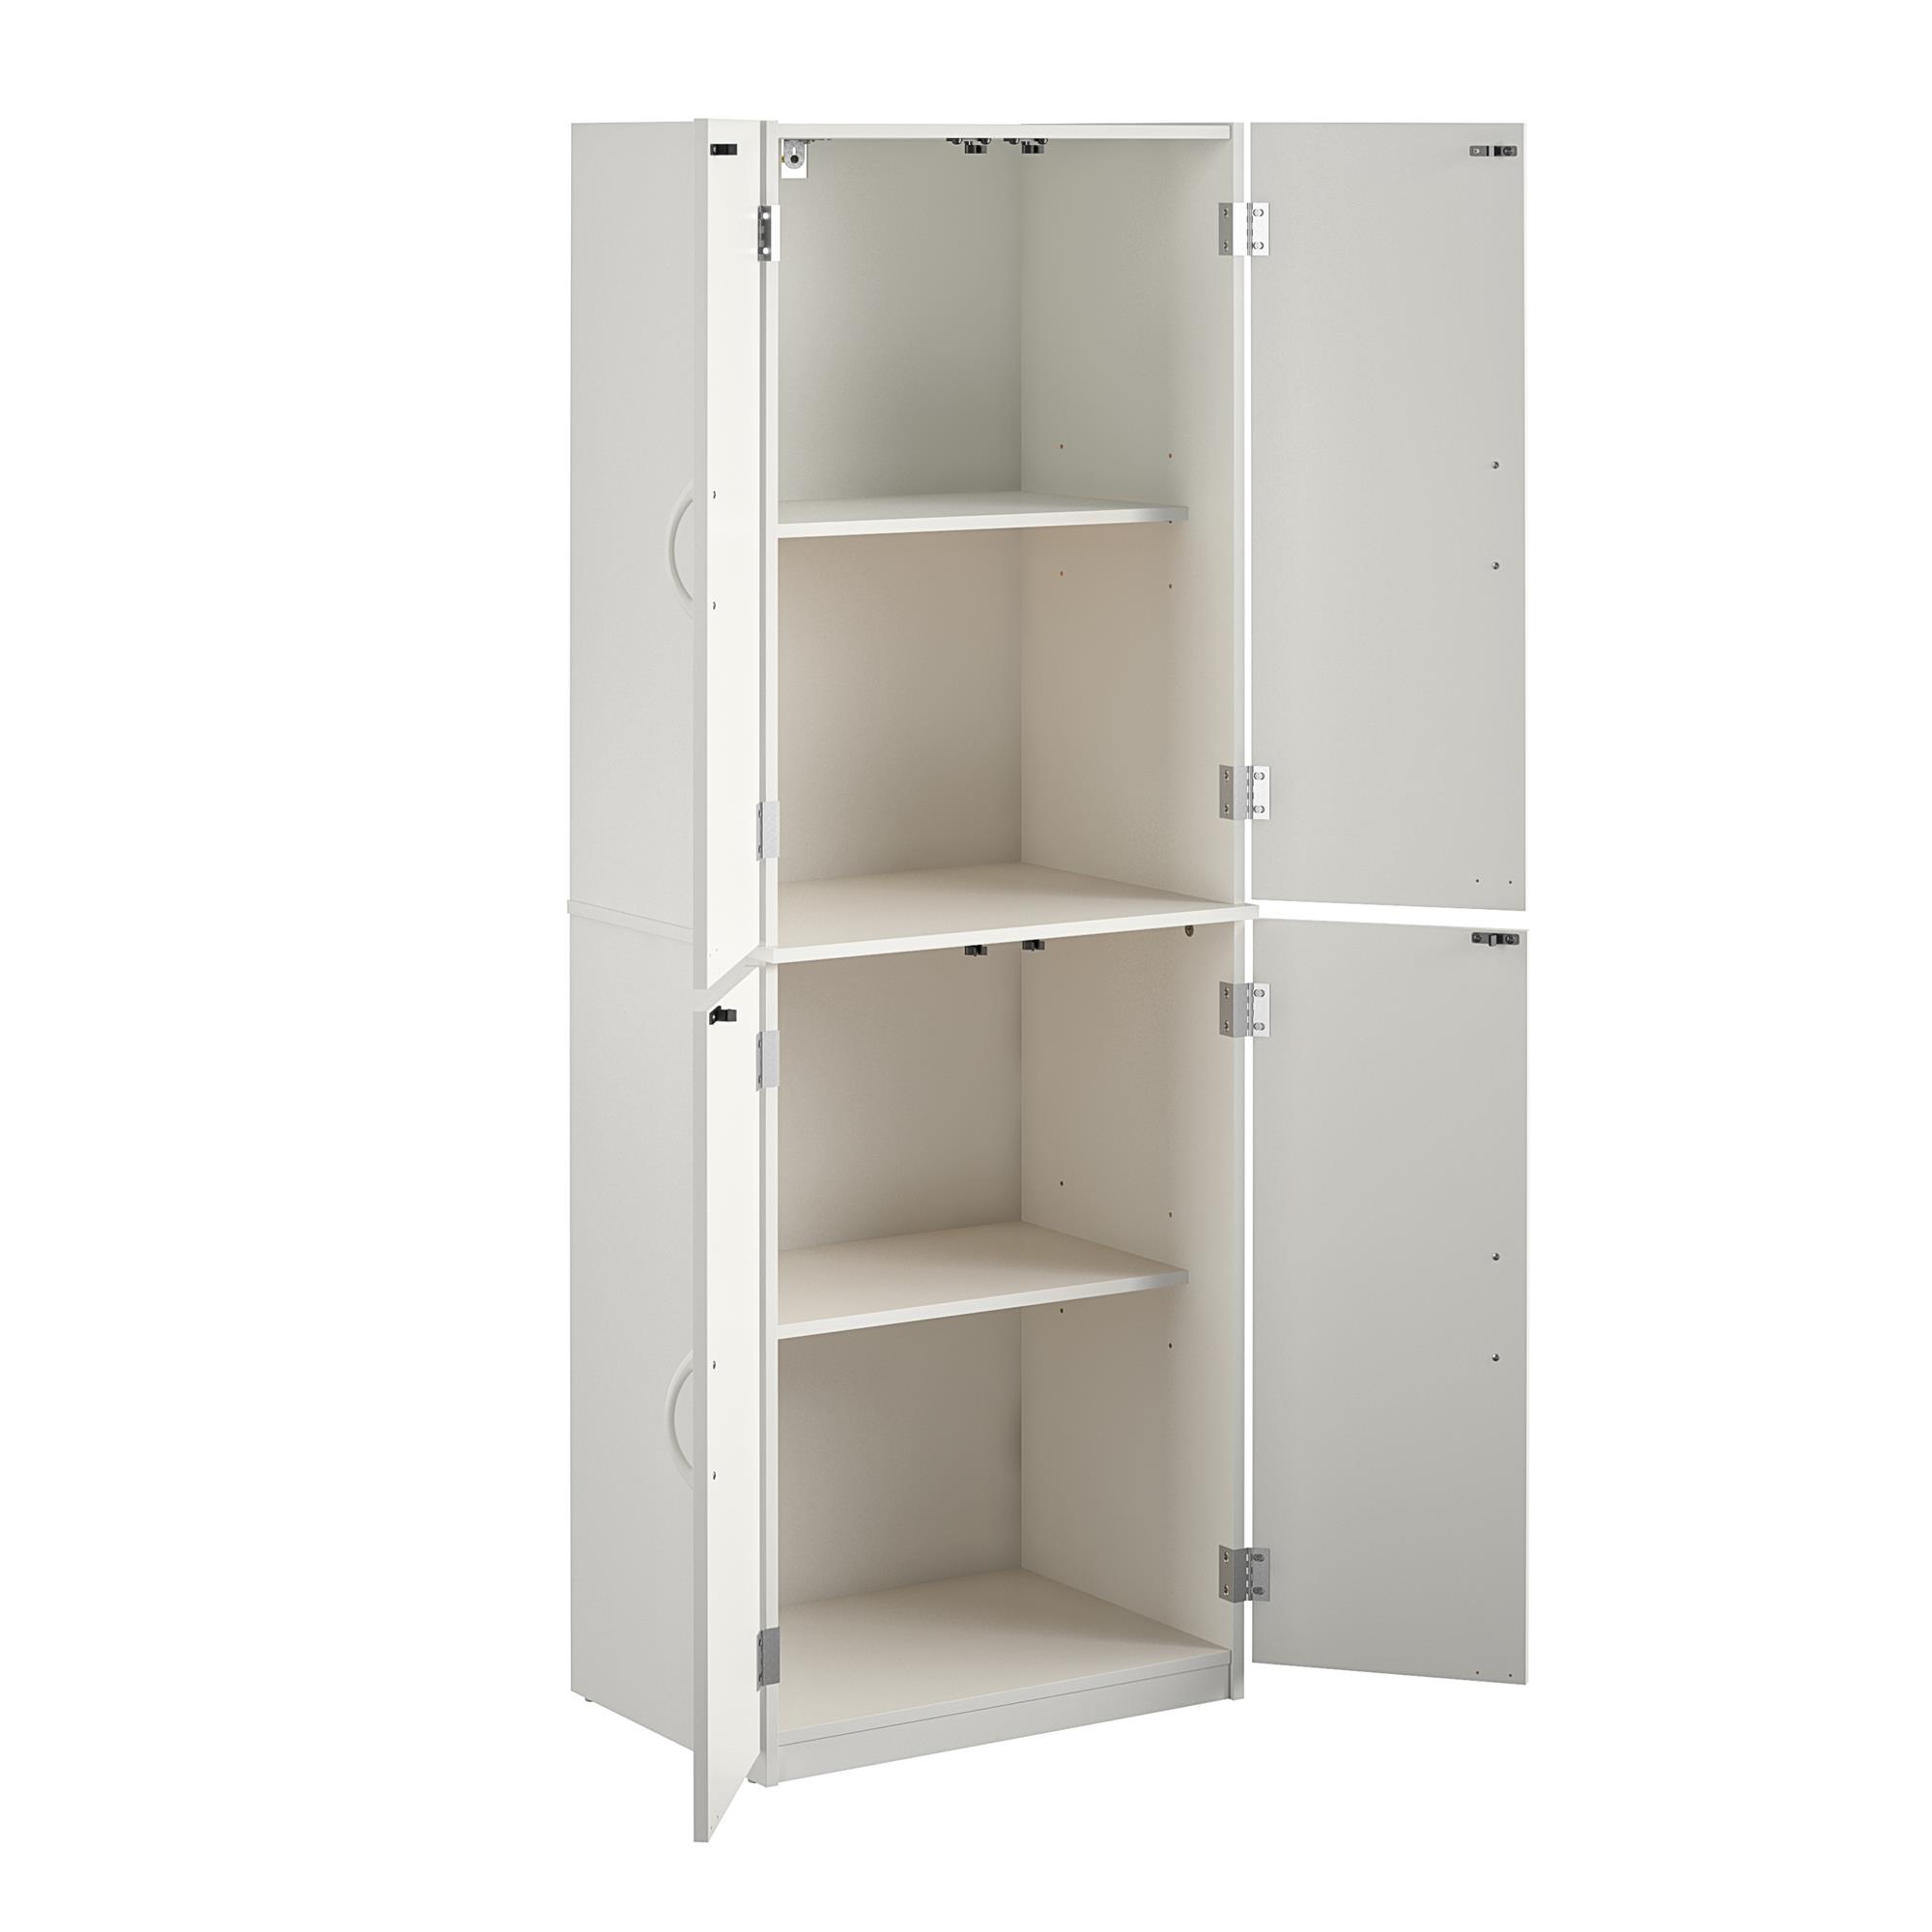 Mainstays 4-Door 5-Foot Storage Cabinet with Adjustable Shelves, White Stipple - image 3 of 17